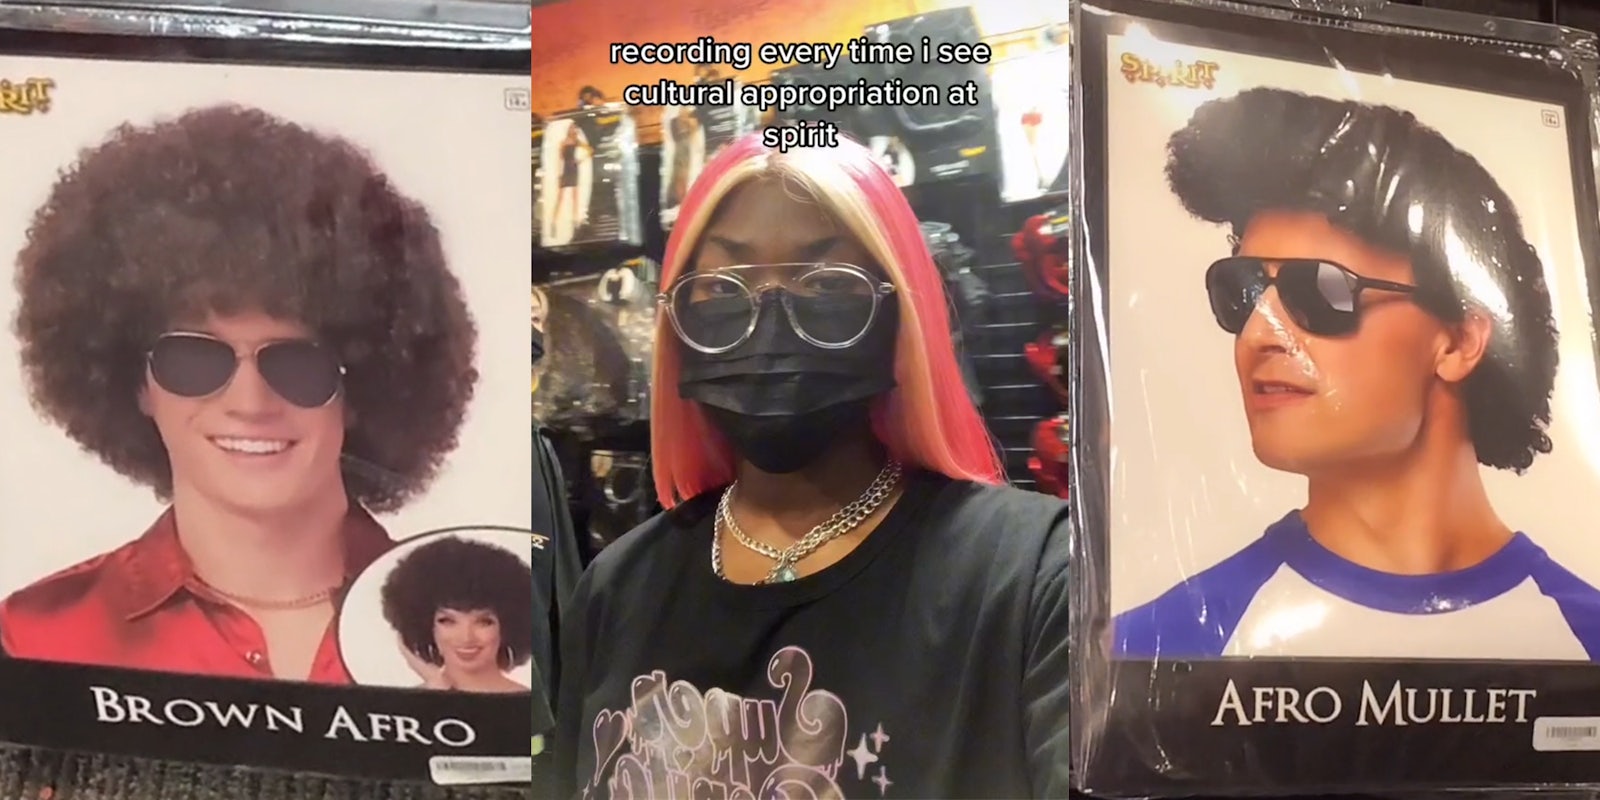 white man with 'Brown Afro' wig (l) young woman in mask with caption 'recording every time i see cultural appropriation at spirit' (c) white man in 'Afro Mullet' wig (r)